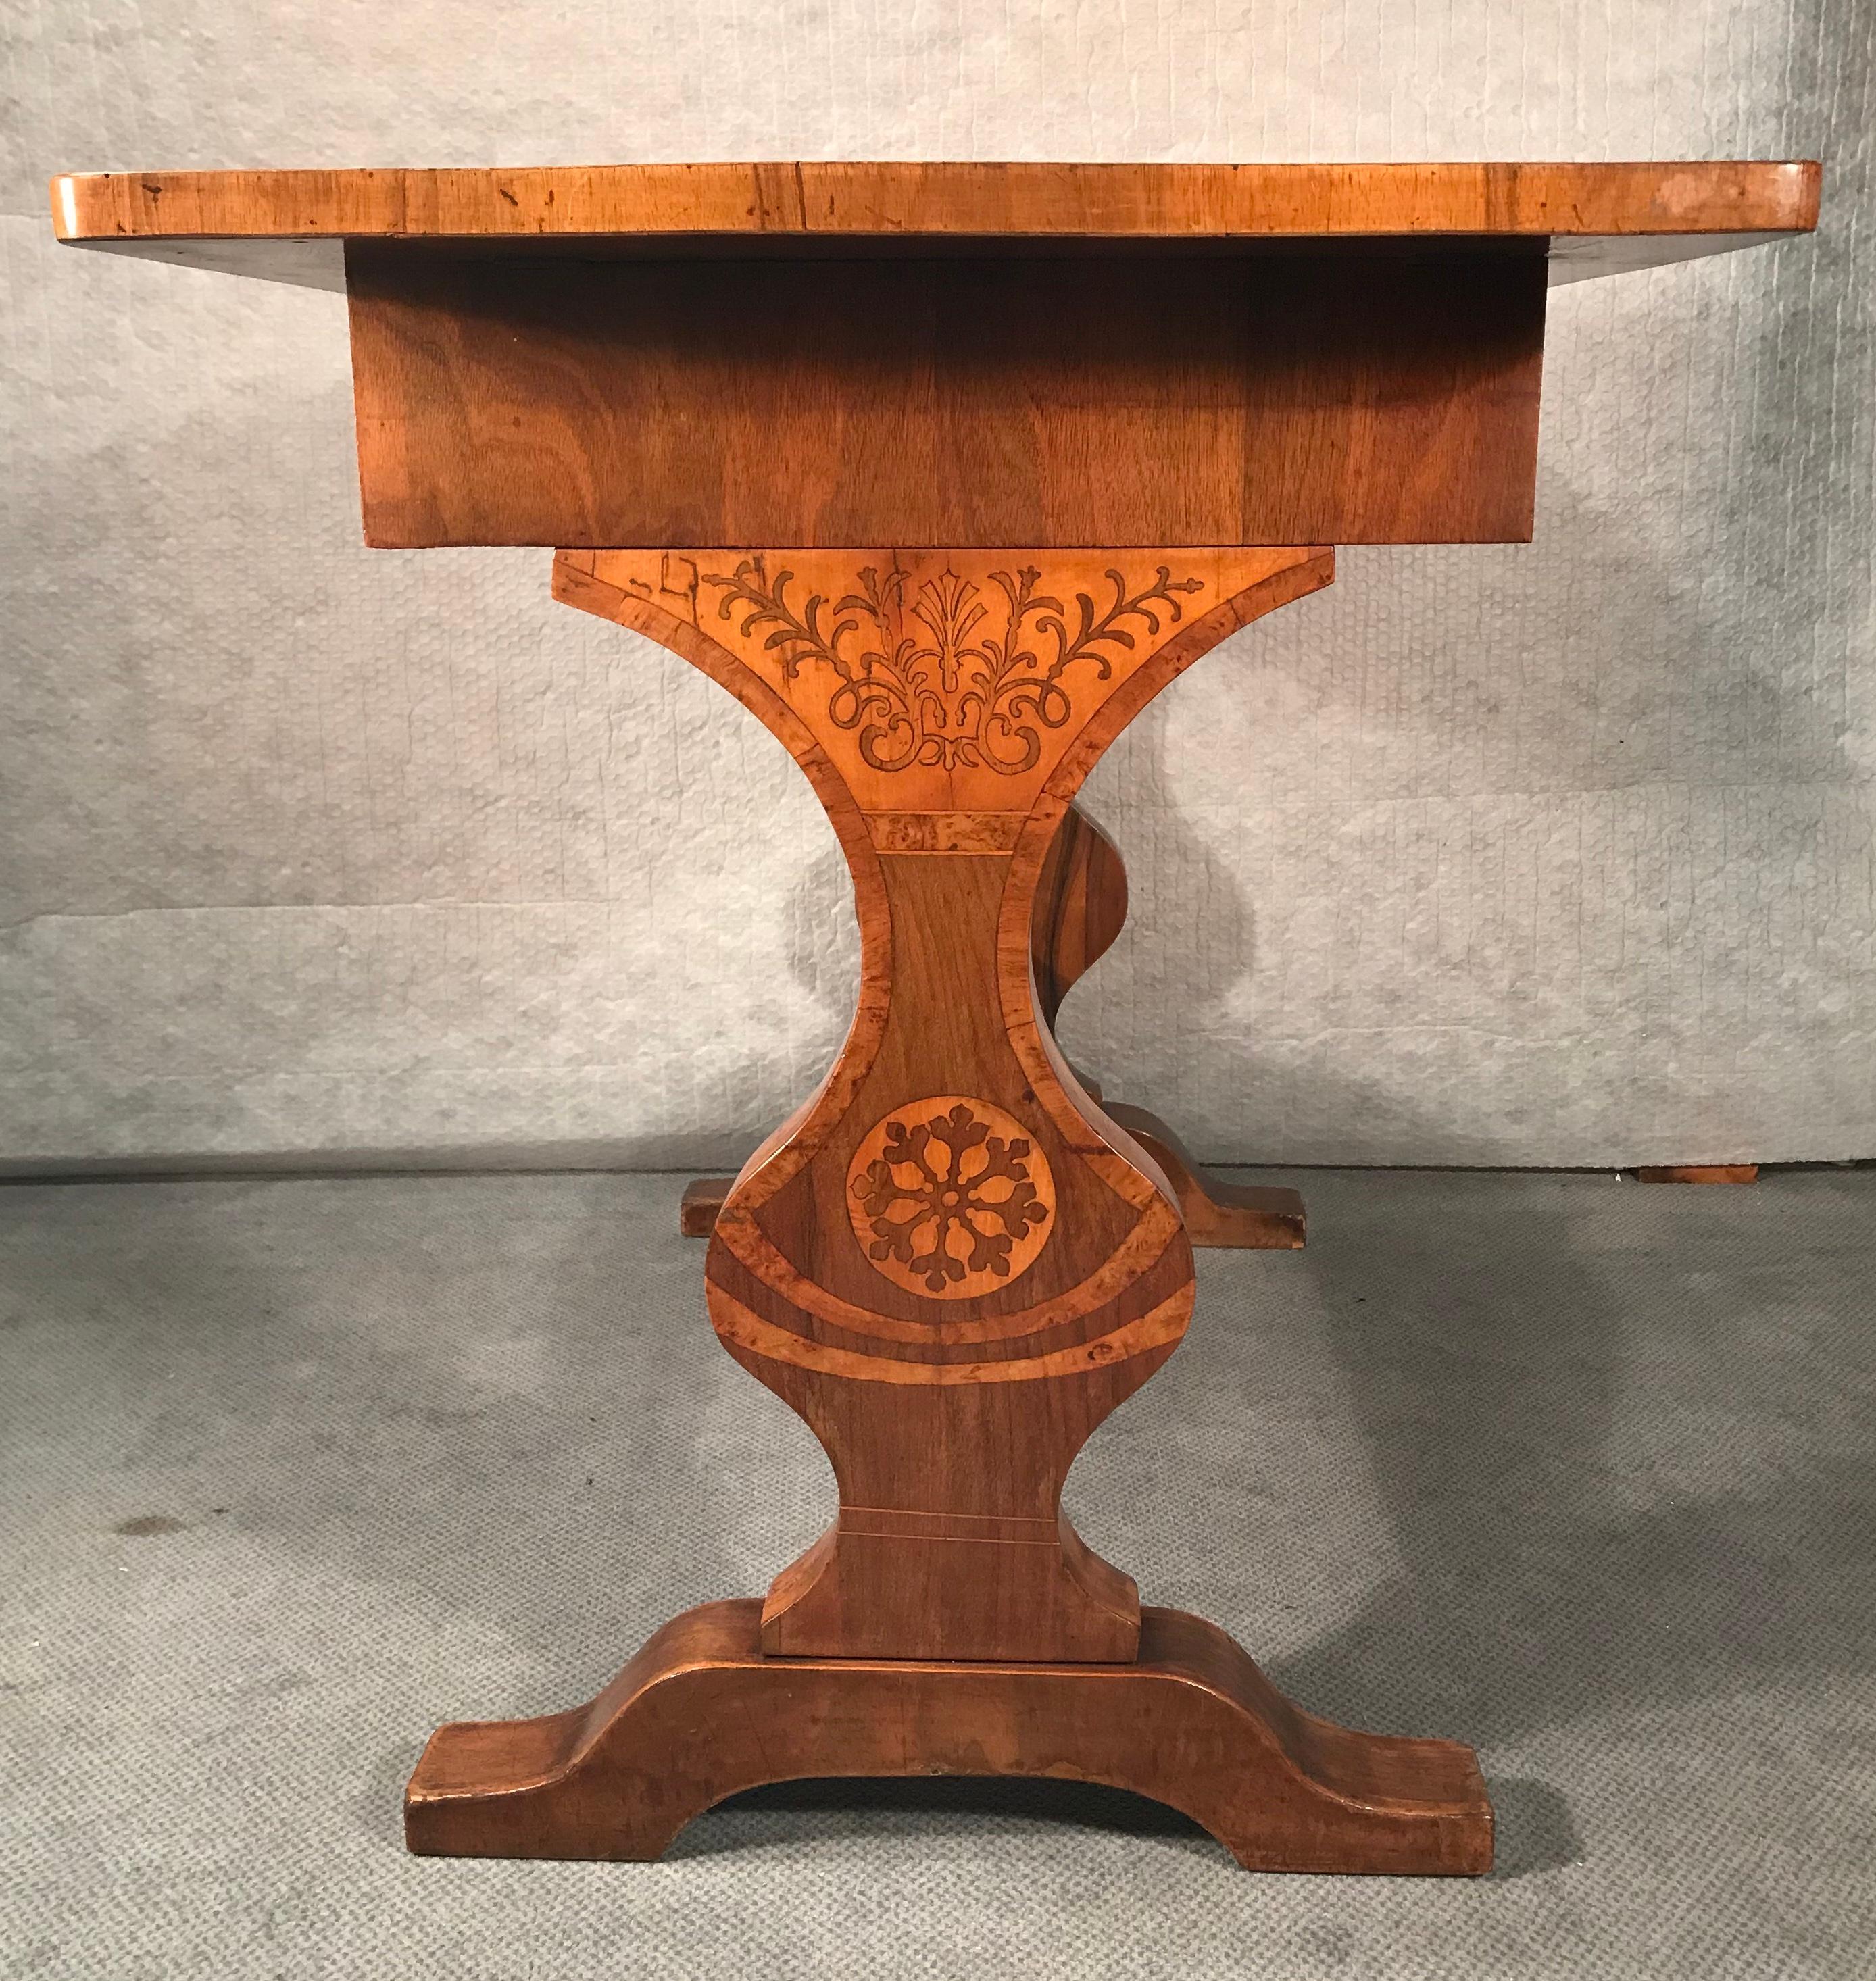 Biedermeier desk, Vienna 1820-1825, walnut with maple Marquetry. The top and the end panels with beautiful flower and vine decor. The table is in good original condition. If required it can be refinished and French polished in our workshop.
It